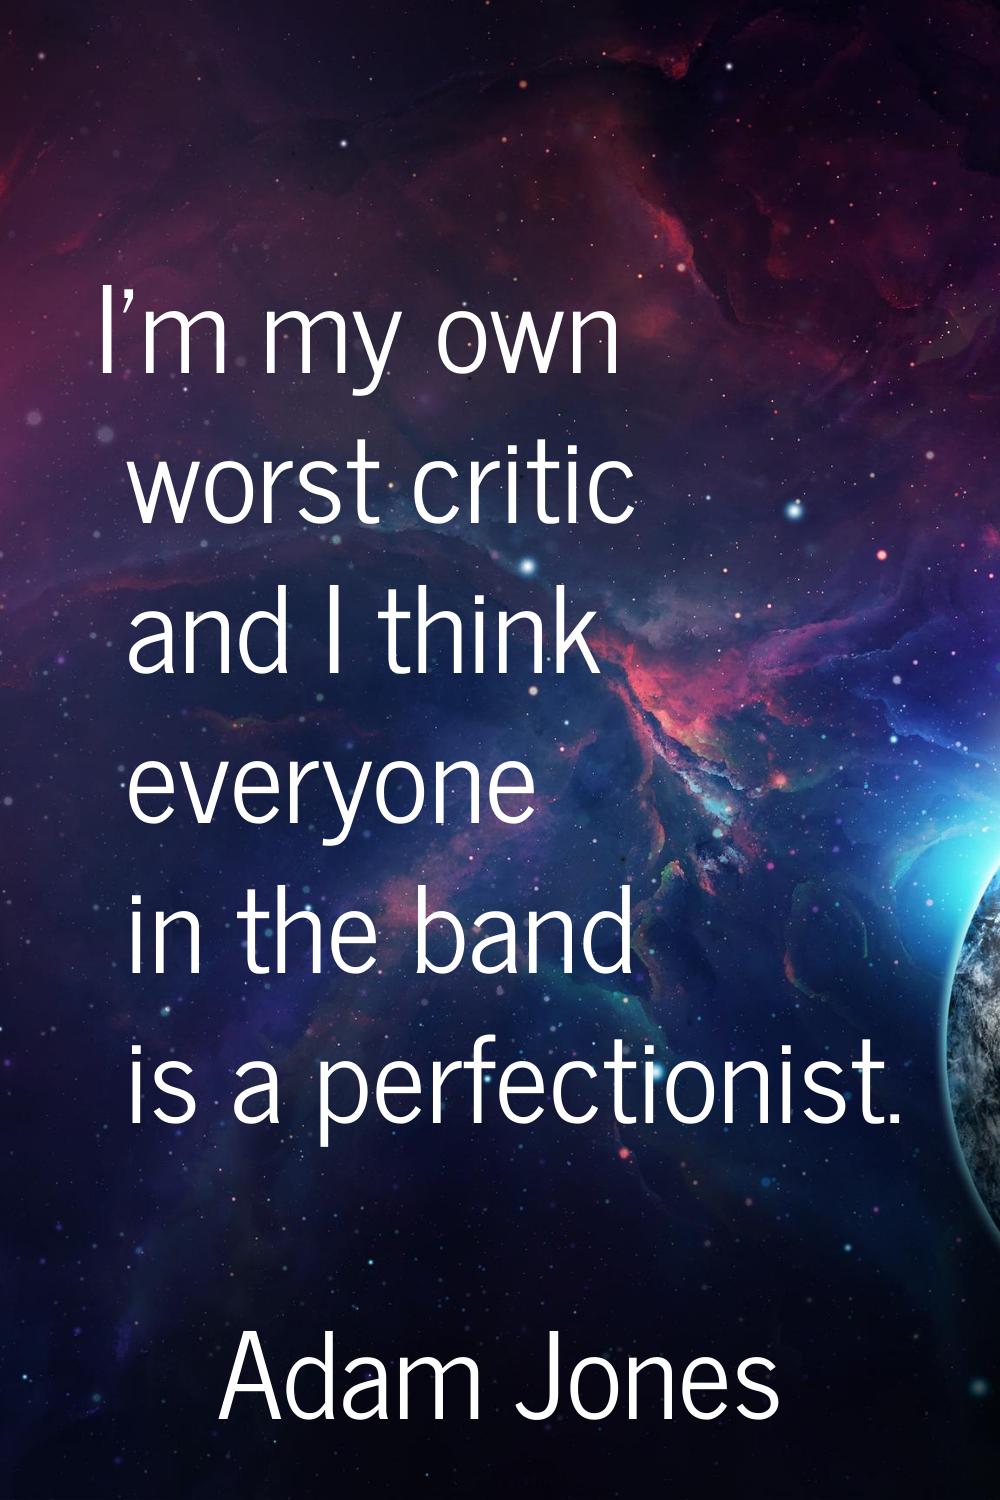 I'm my own worst critic and I think everyone in the band is a perfectionist.